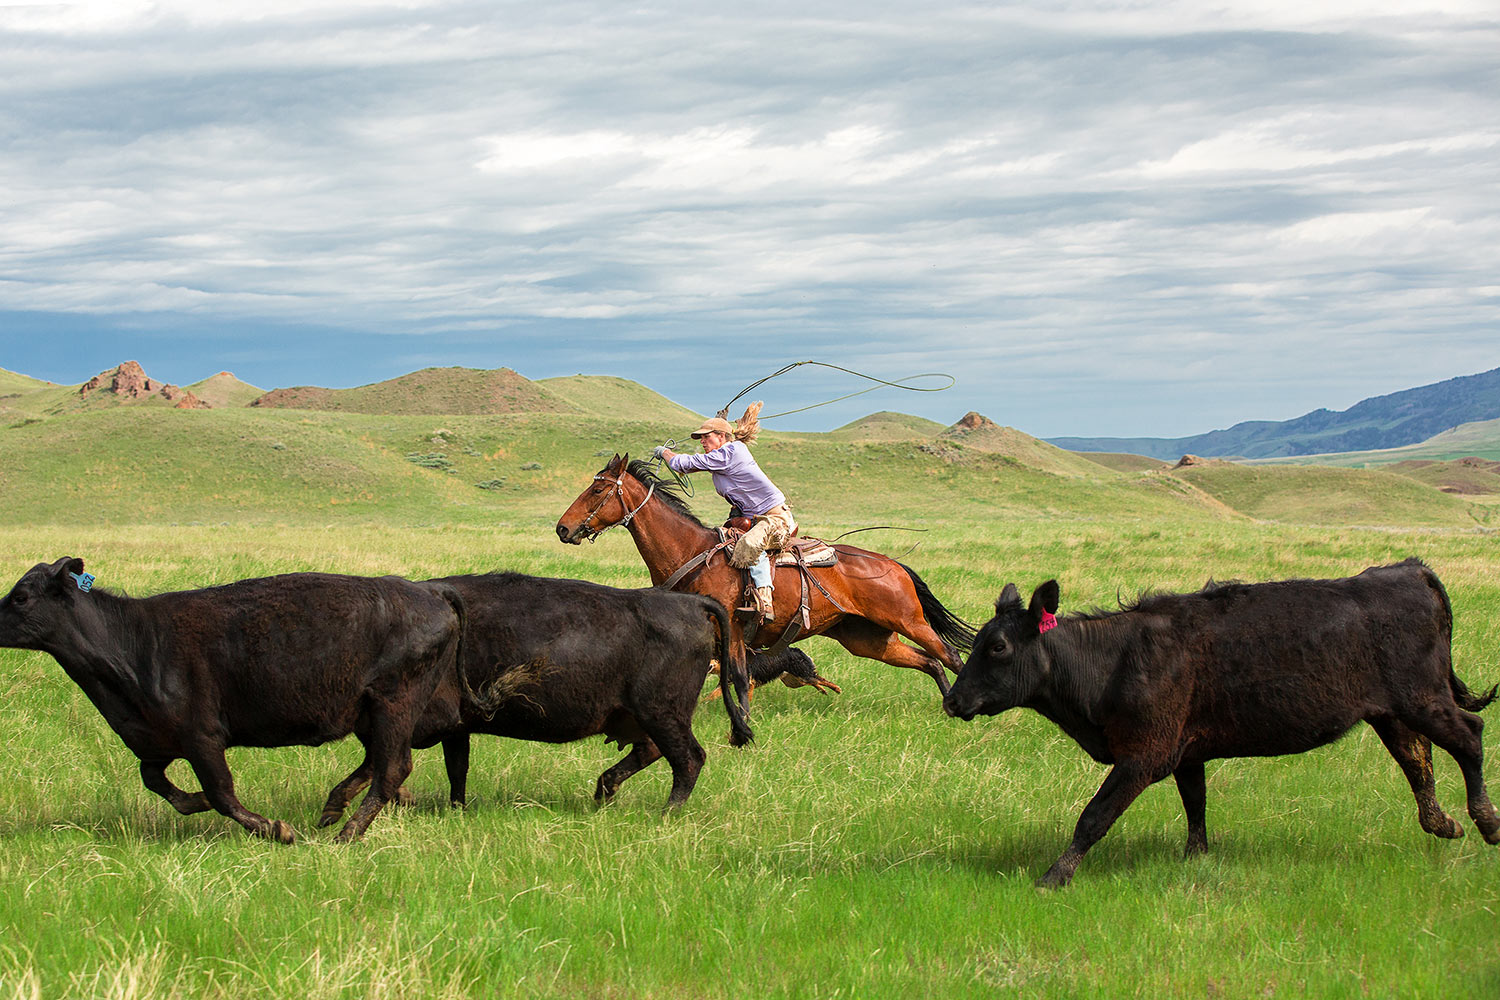 A cowgirl chases after an errant calf near Cleveland, Montana.&nbsp;→ License Photo